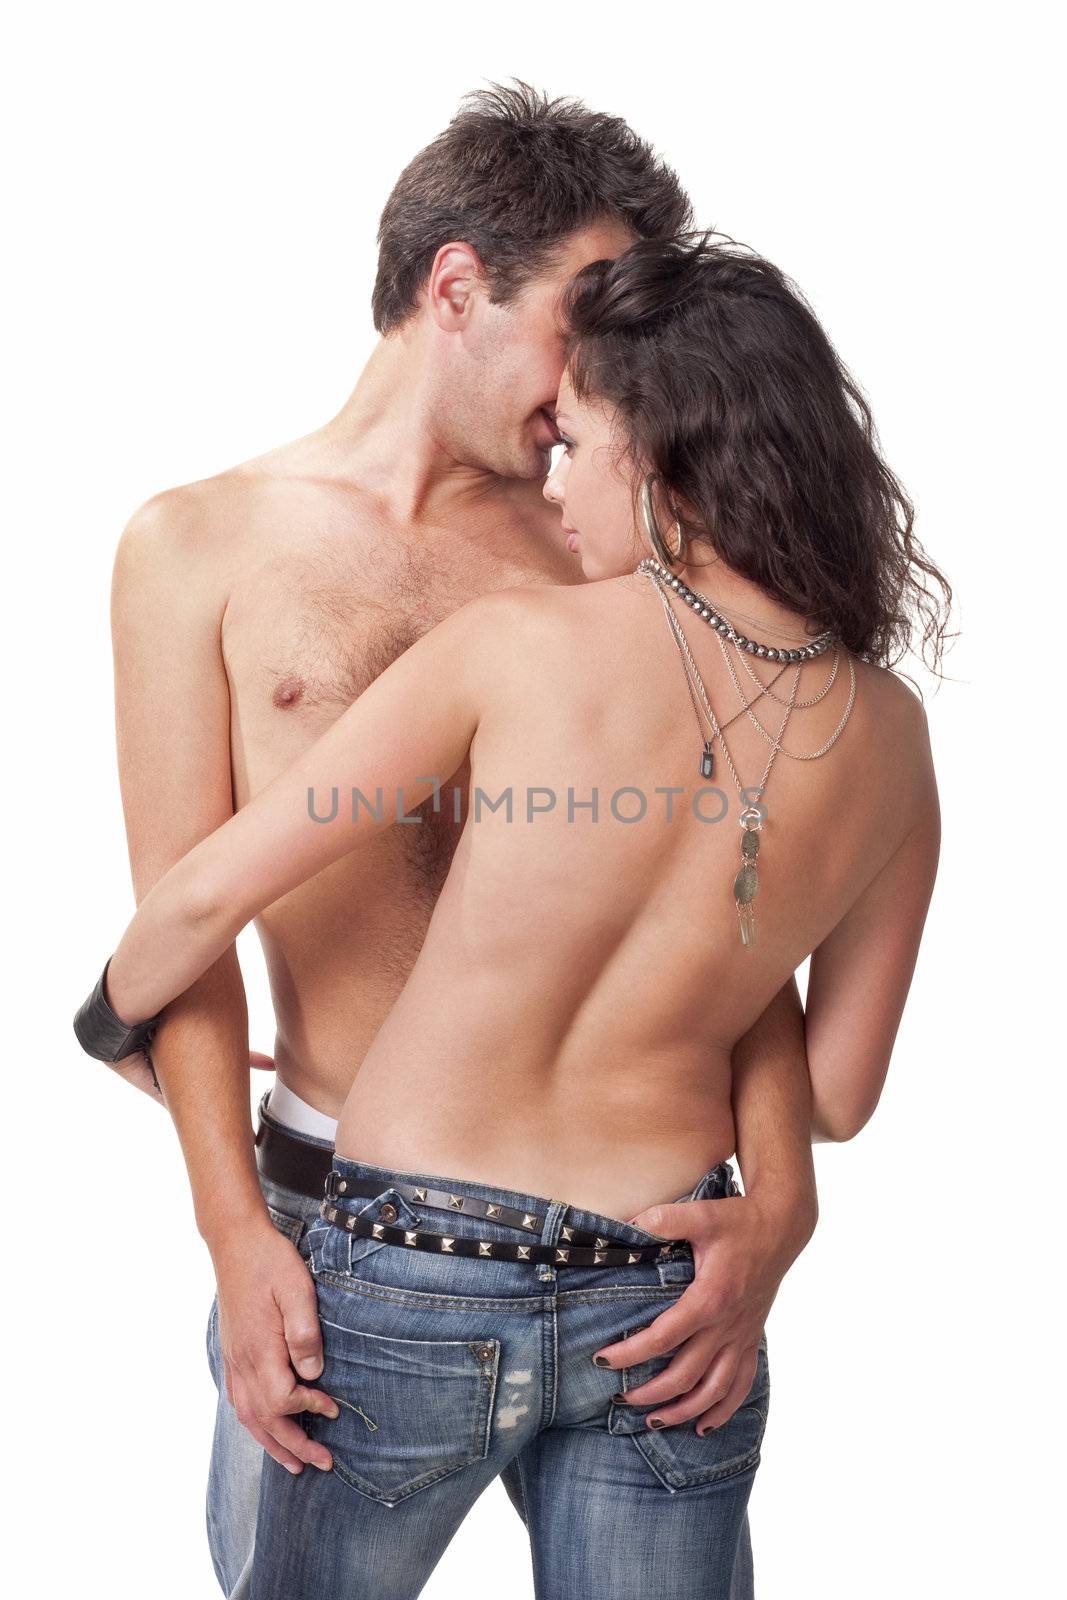 Young couple embrace each other with tenderness